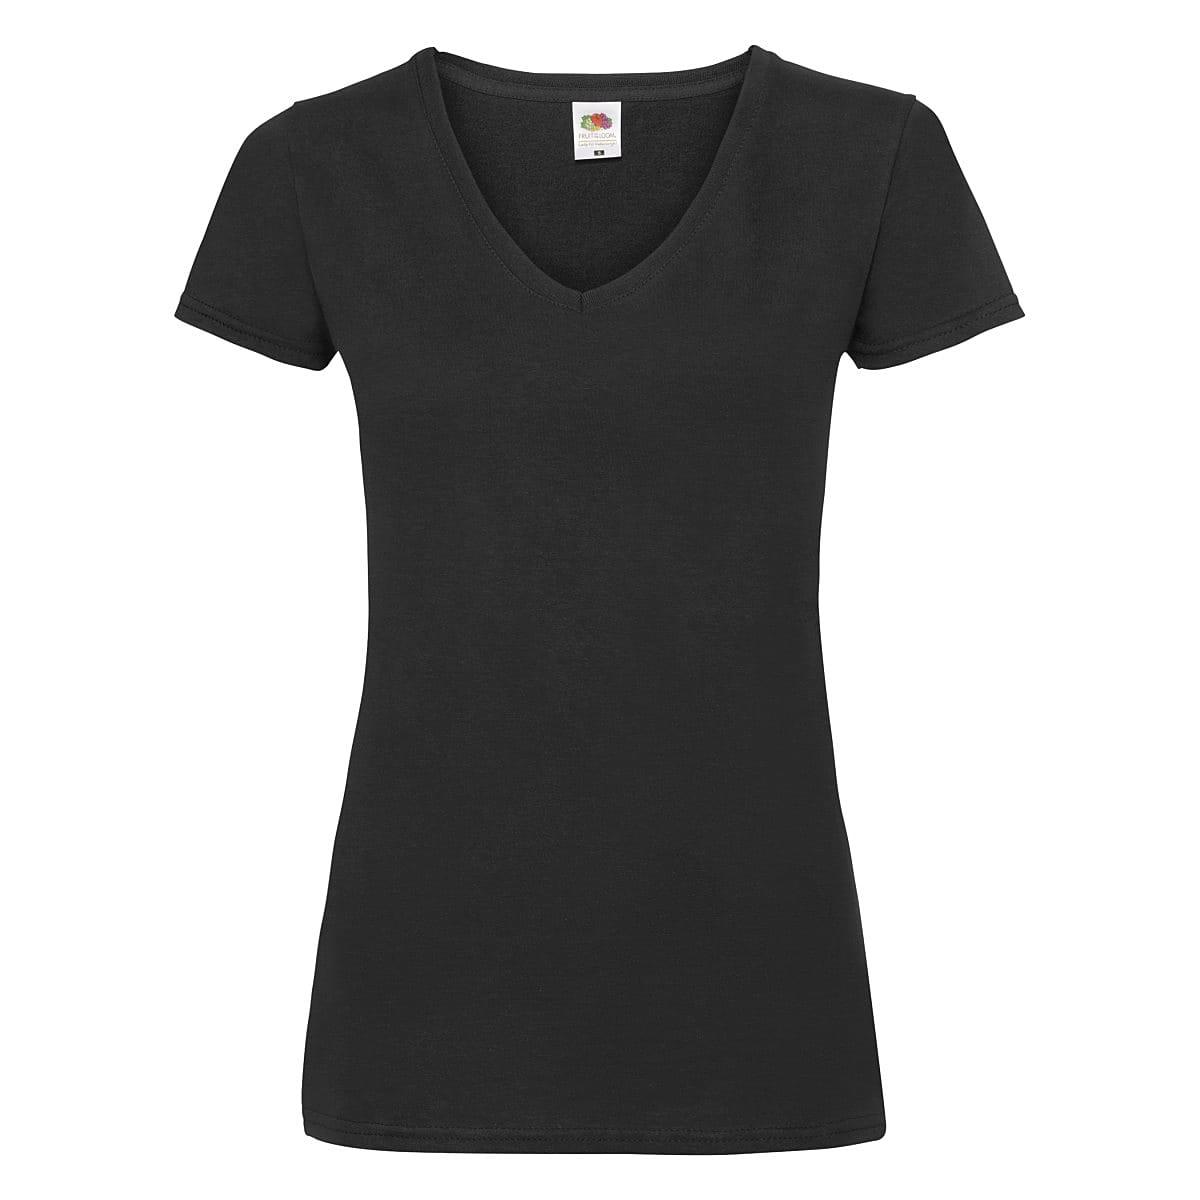 Fruit Of The Loom Lady-Fit Valueweight V-Neck T-Shirt in Black (Product Code: 61398)